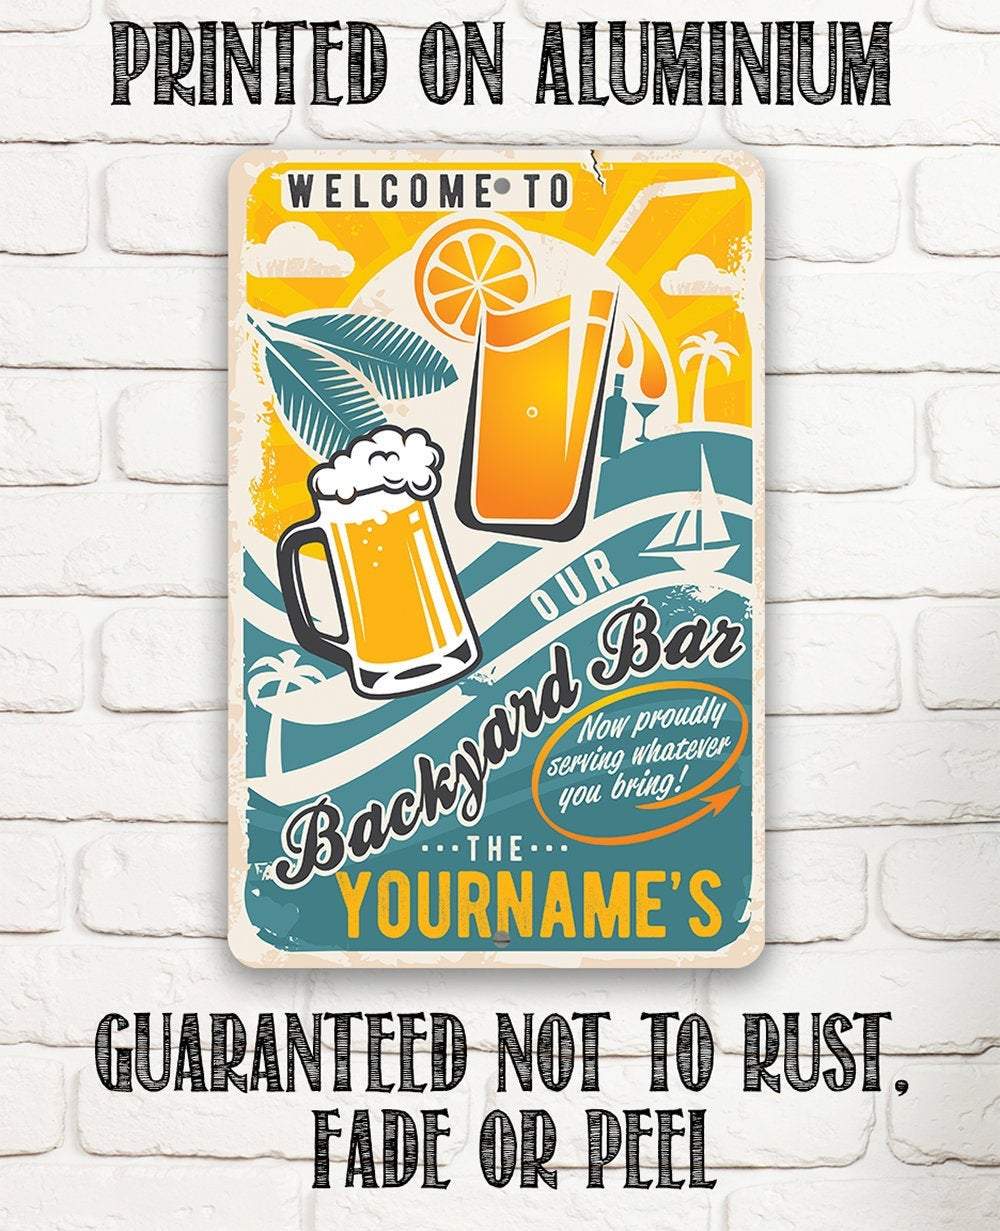 Personalized - Welcome To Our Backyard Bar - Metal Sign | Lone Star Art.